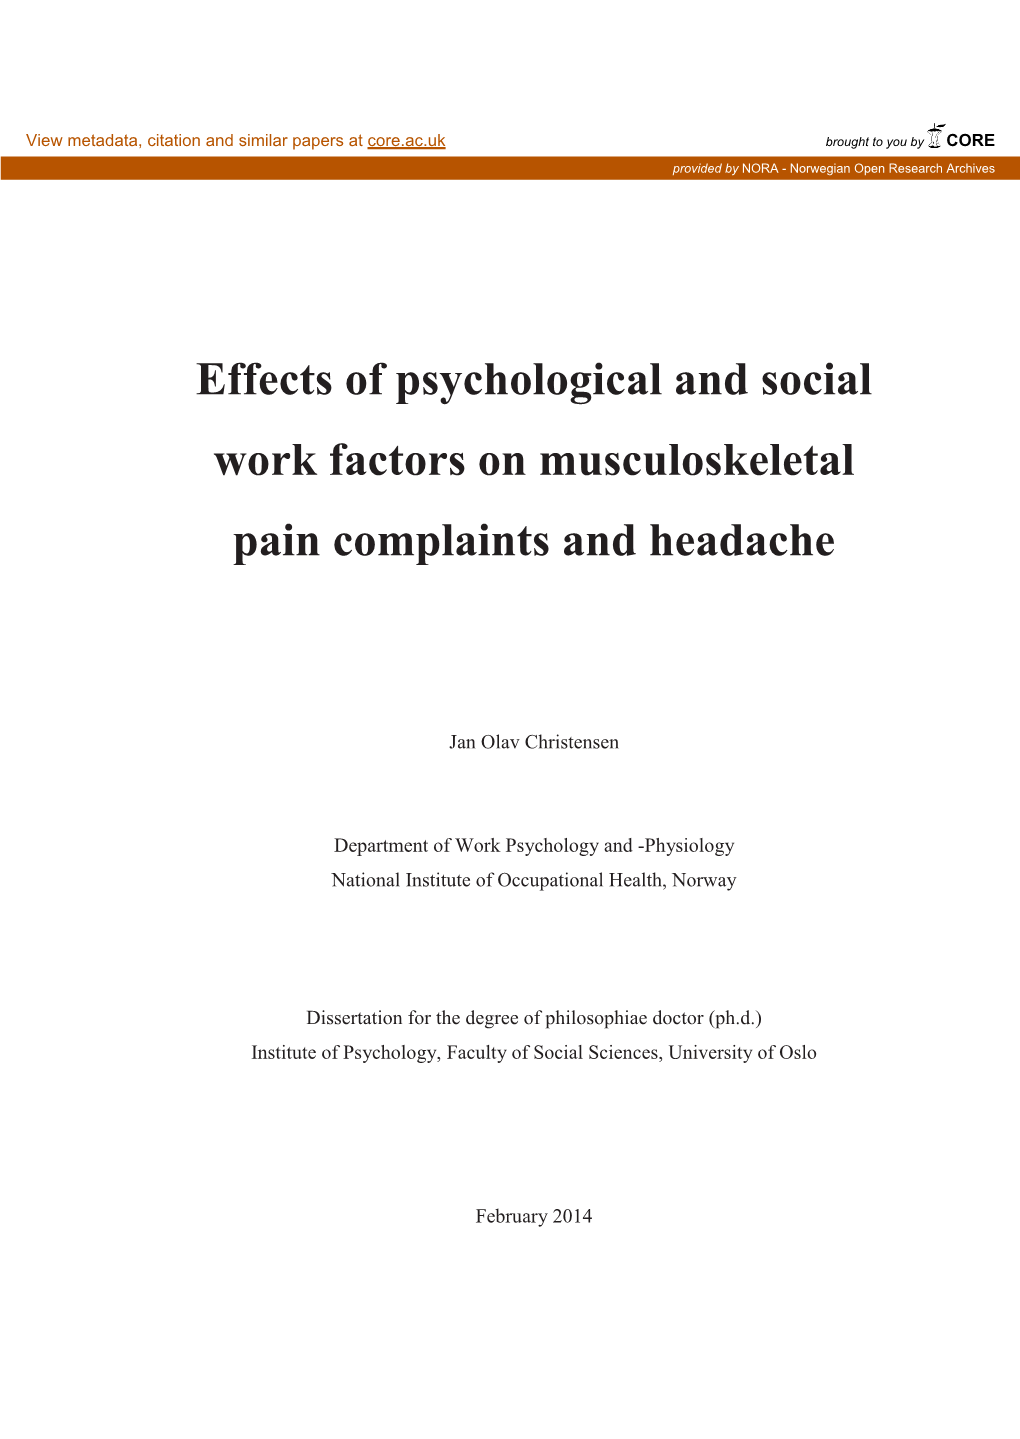 Effects of Psychological and Social Work Factors on Musculoskeletal